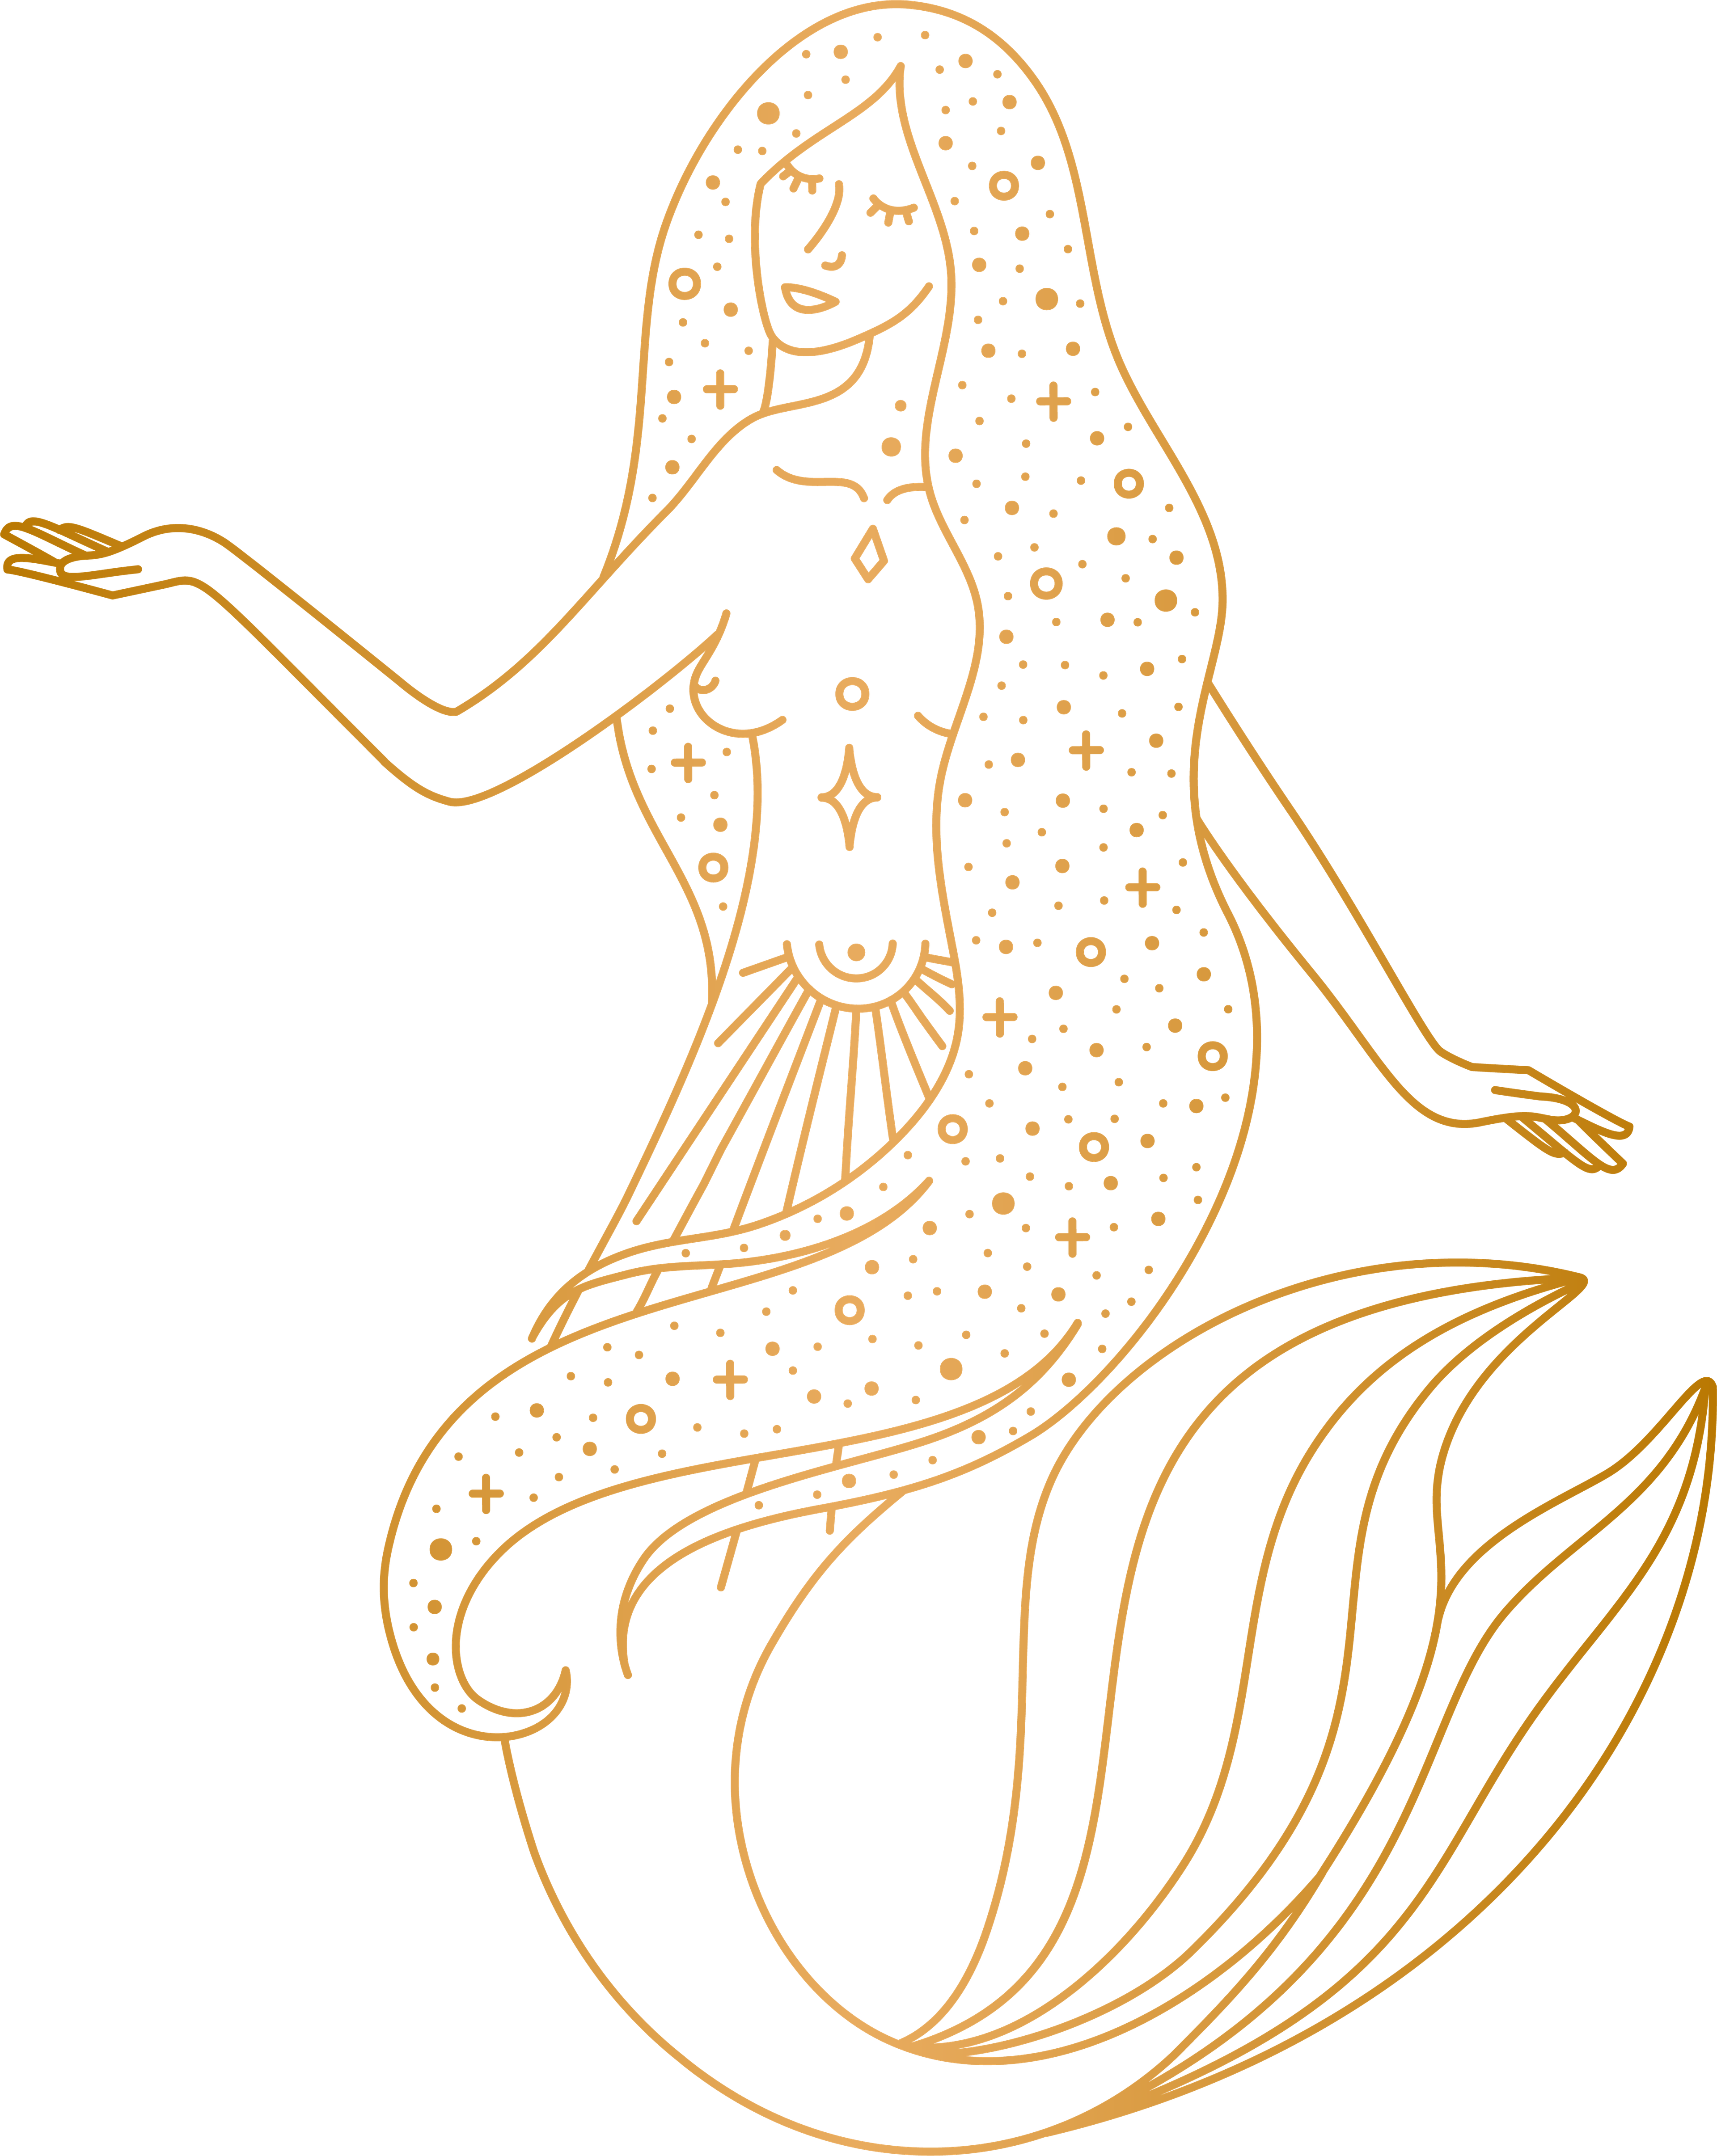 Artistic representation of a mermaid for Glomega by Glow Natural Wellness.